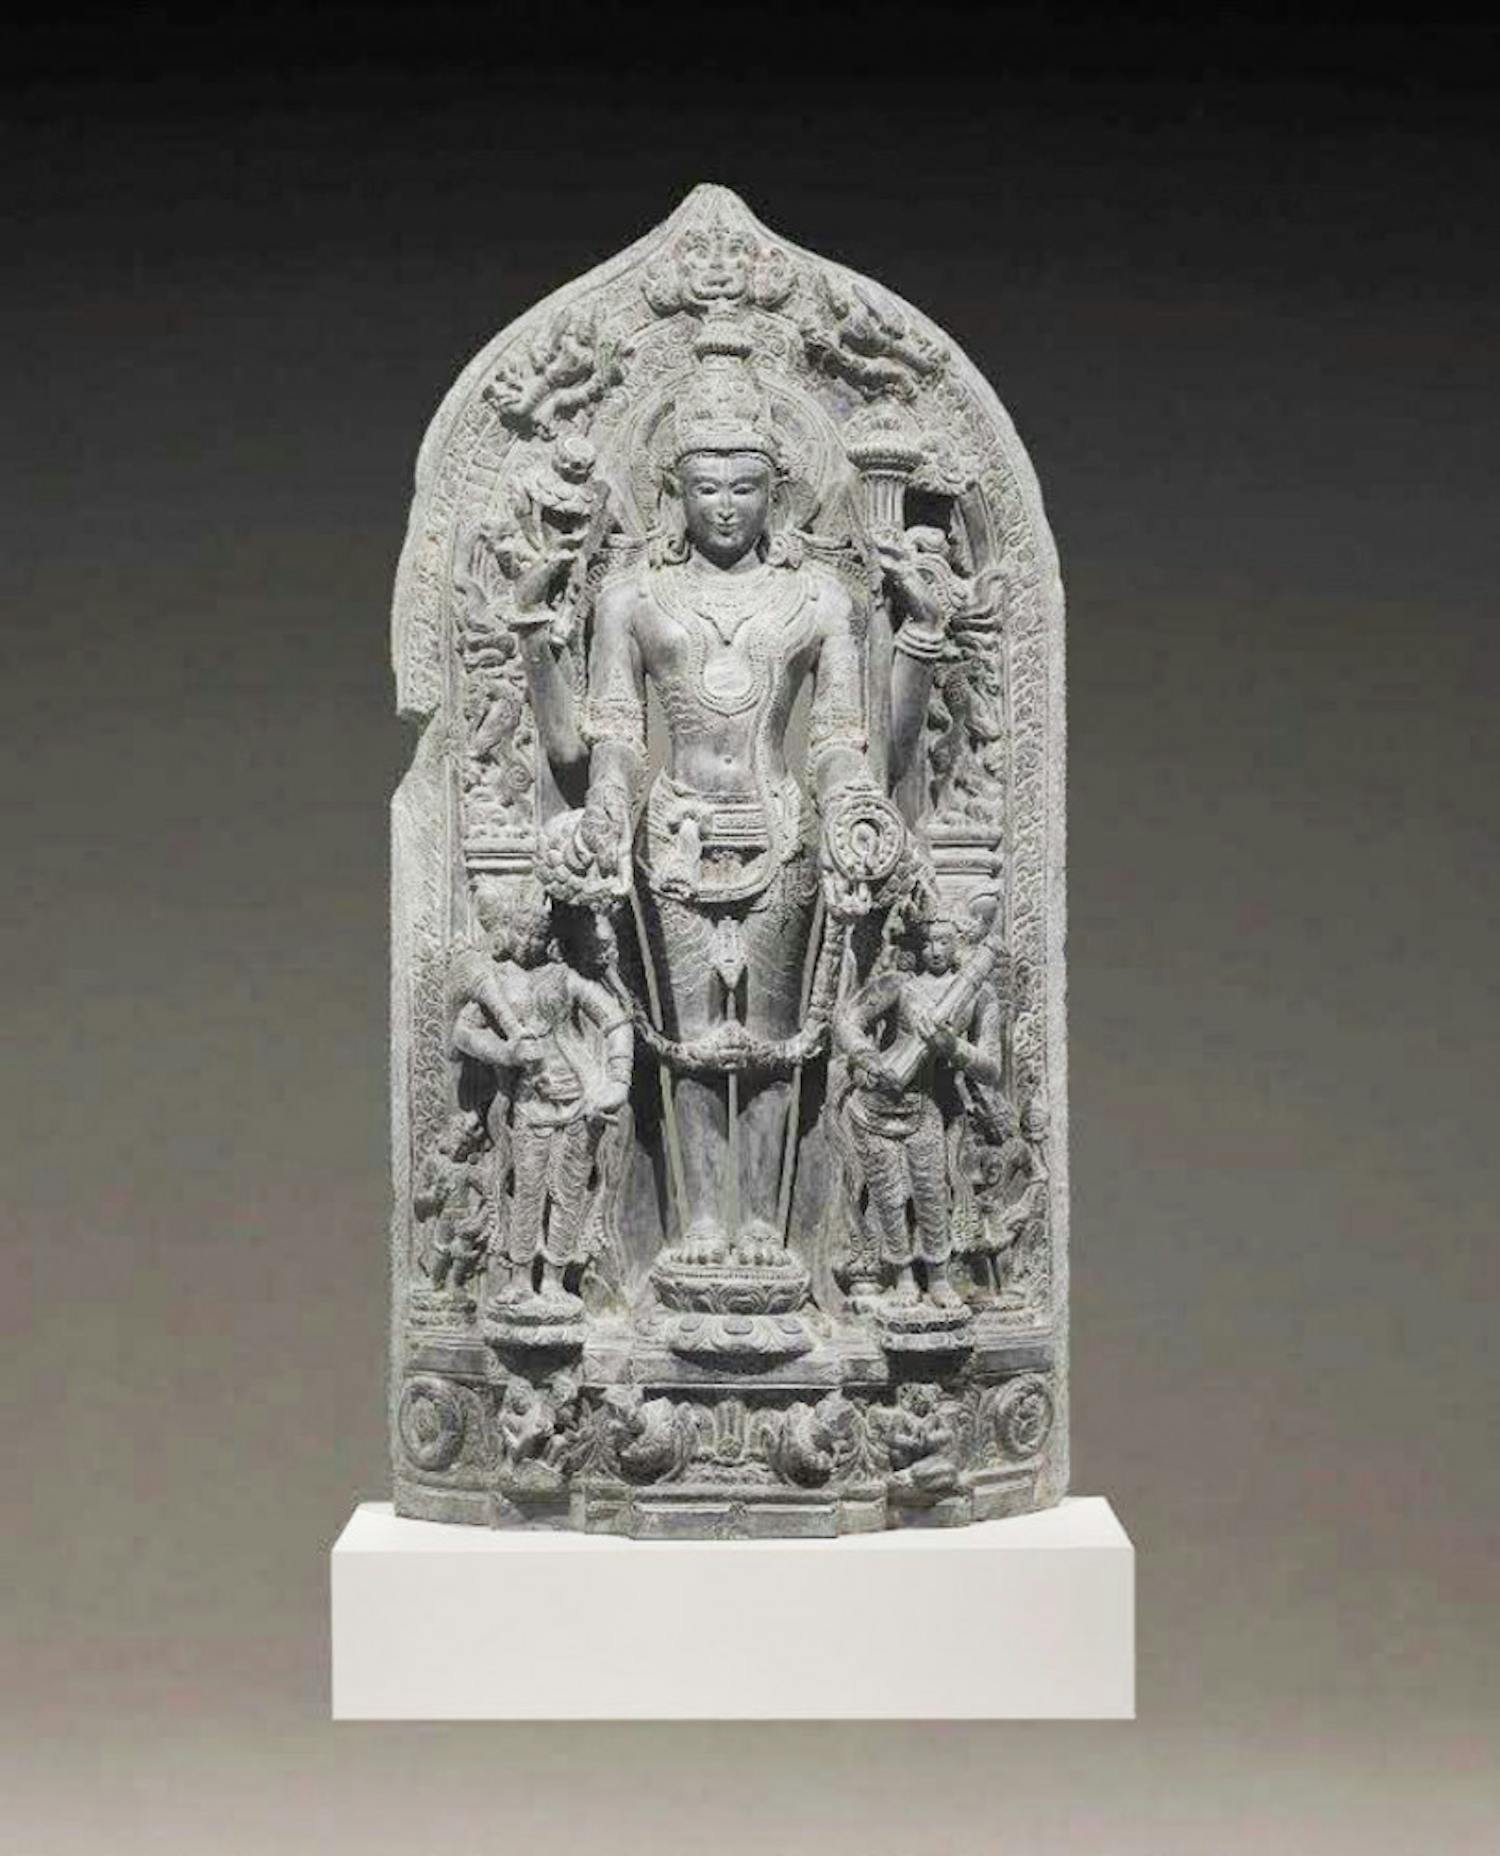 The Samuel P. Harn Museum of Art paid $75,000 to Subhash Kapoor, an art dealer currently on trial for an international art smuggling racket, for The Stele of Vishnu Trivikrama in 1999. Homeland Security Investigations took the statue from the Harn last week to return it back to its origin in India after evidence of it being stolen.Courtesy to the Alligator